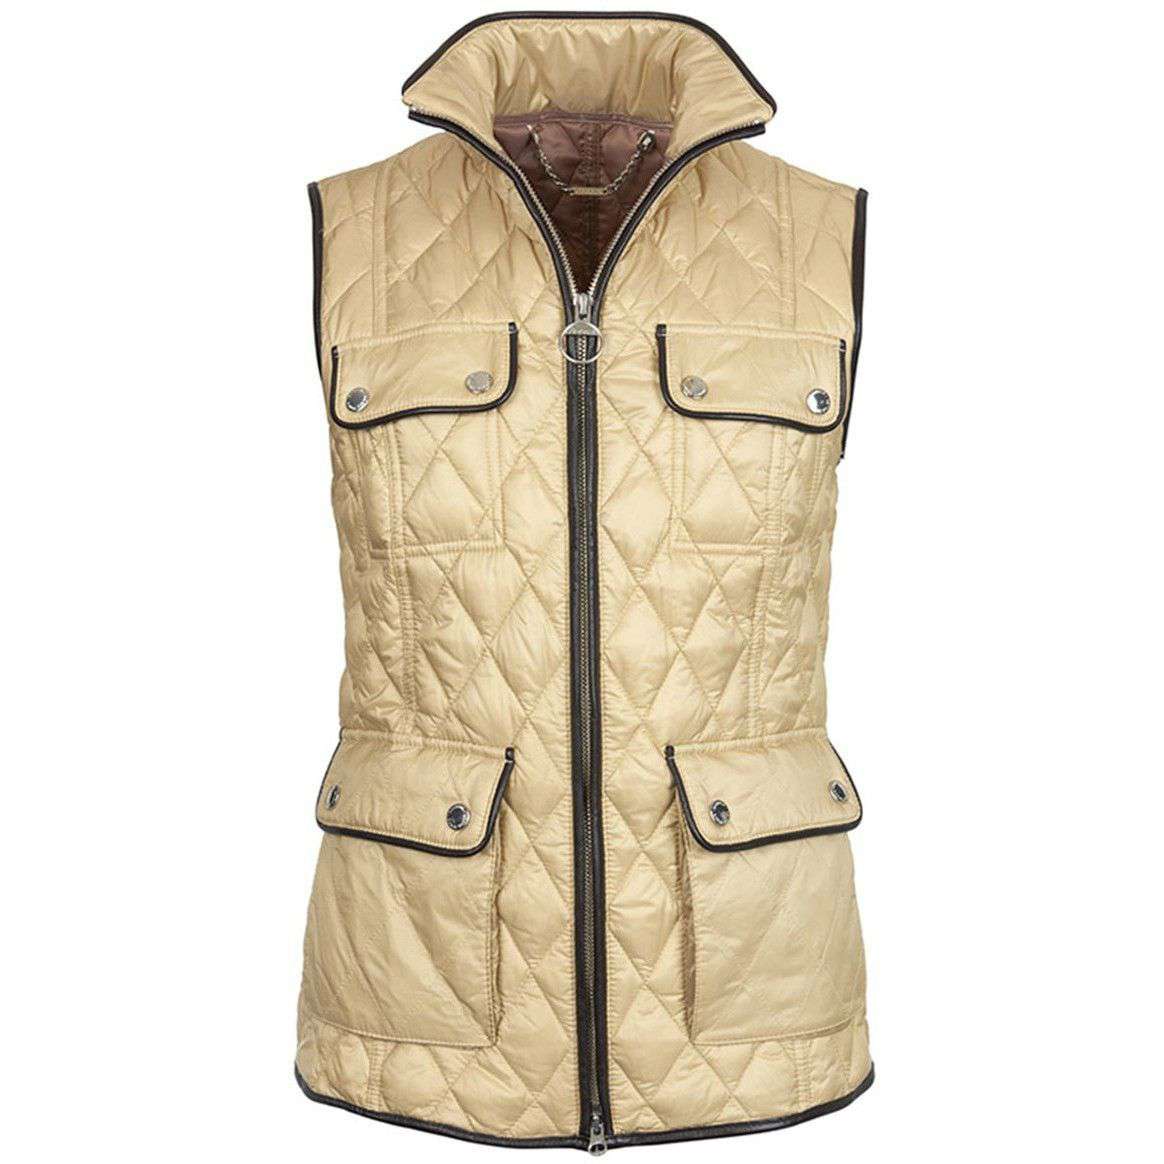 Range Rover Viscon Gilet in Dark Pearl by Barbour - Country Club Prep